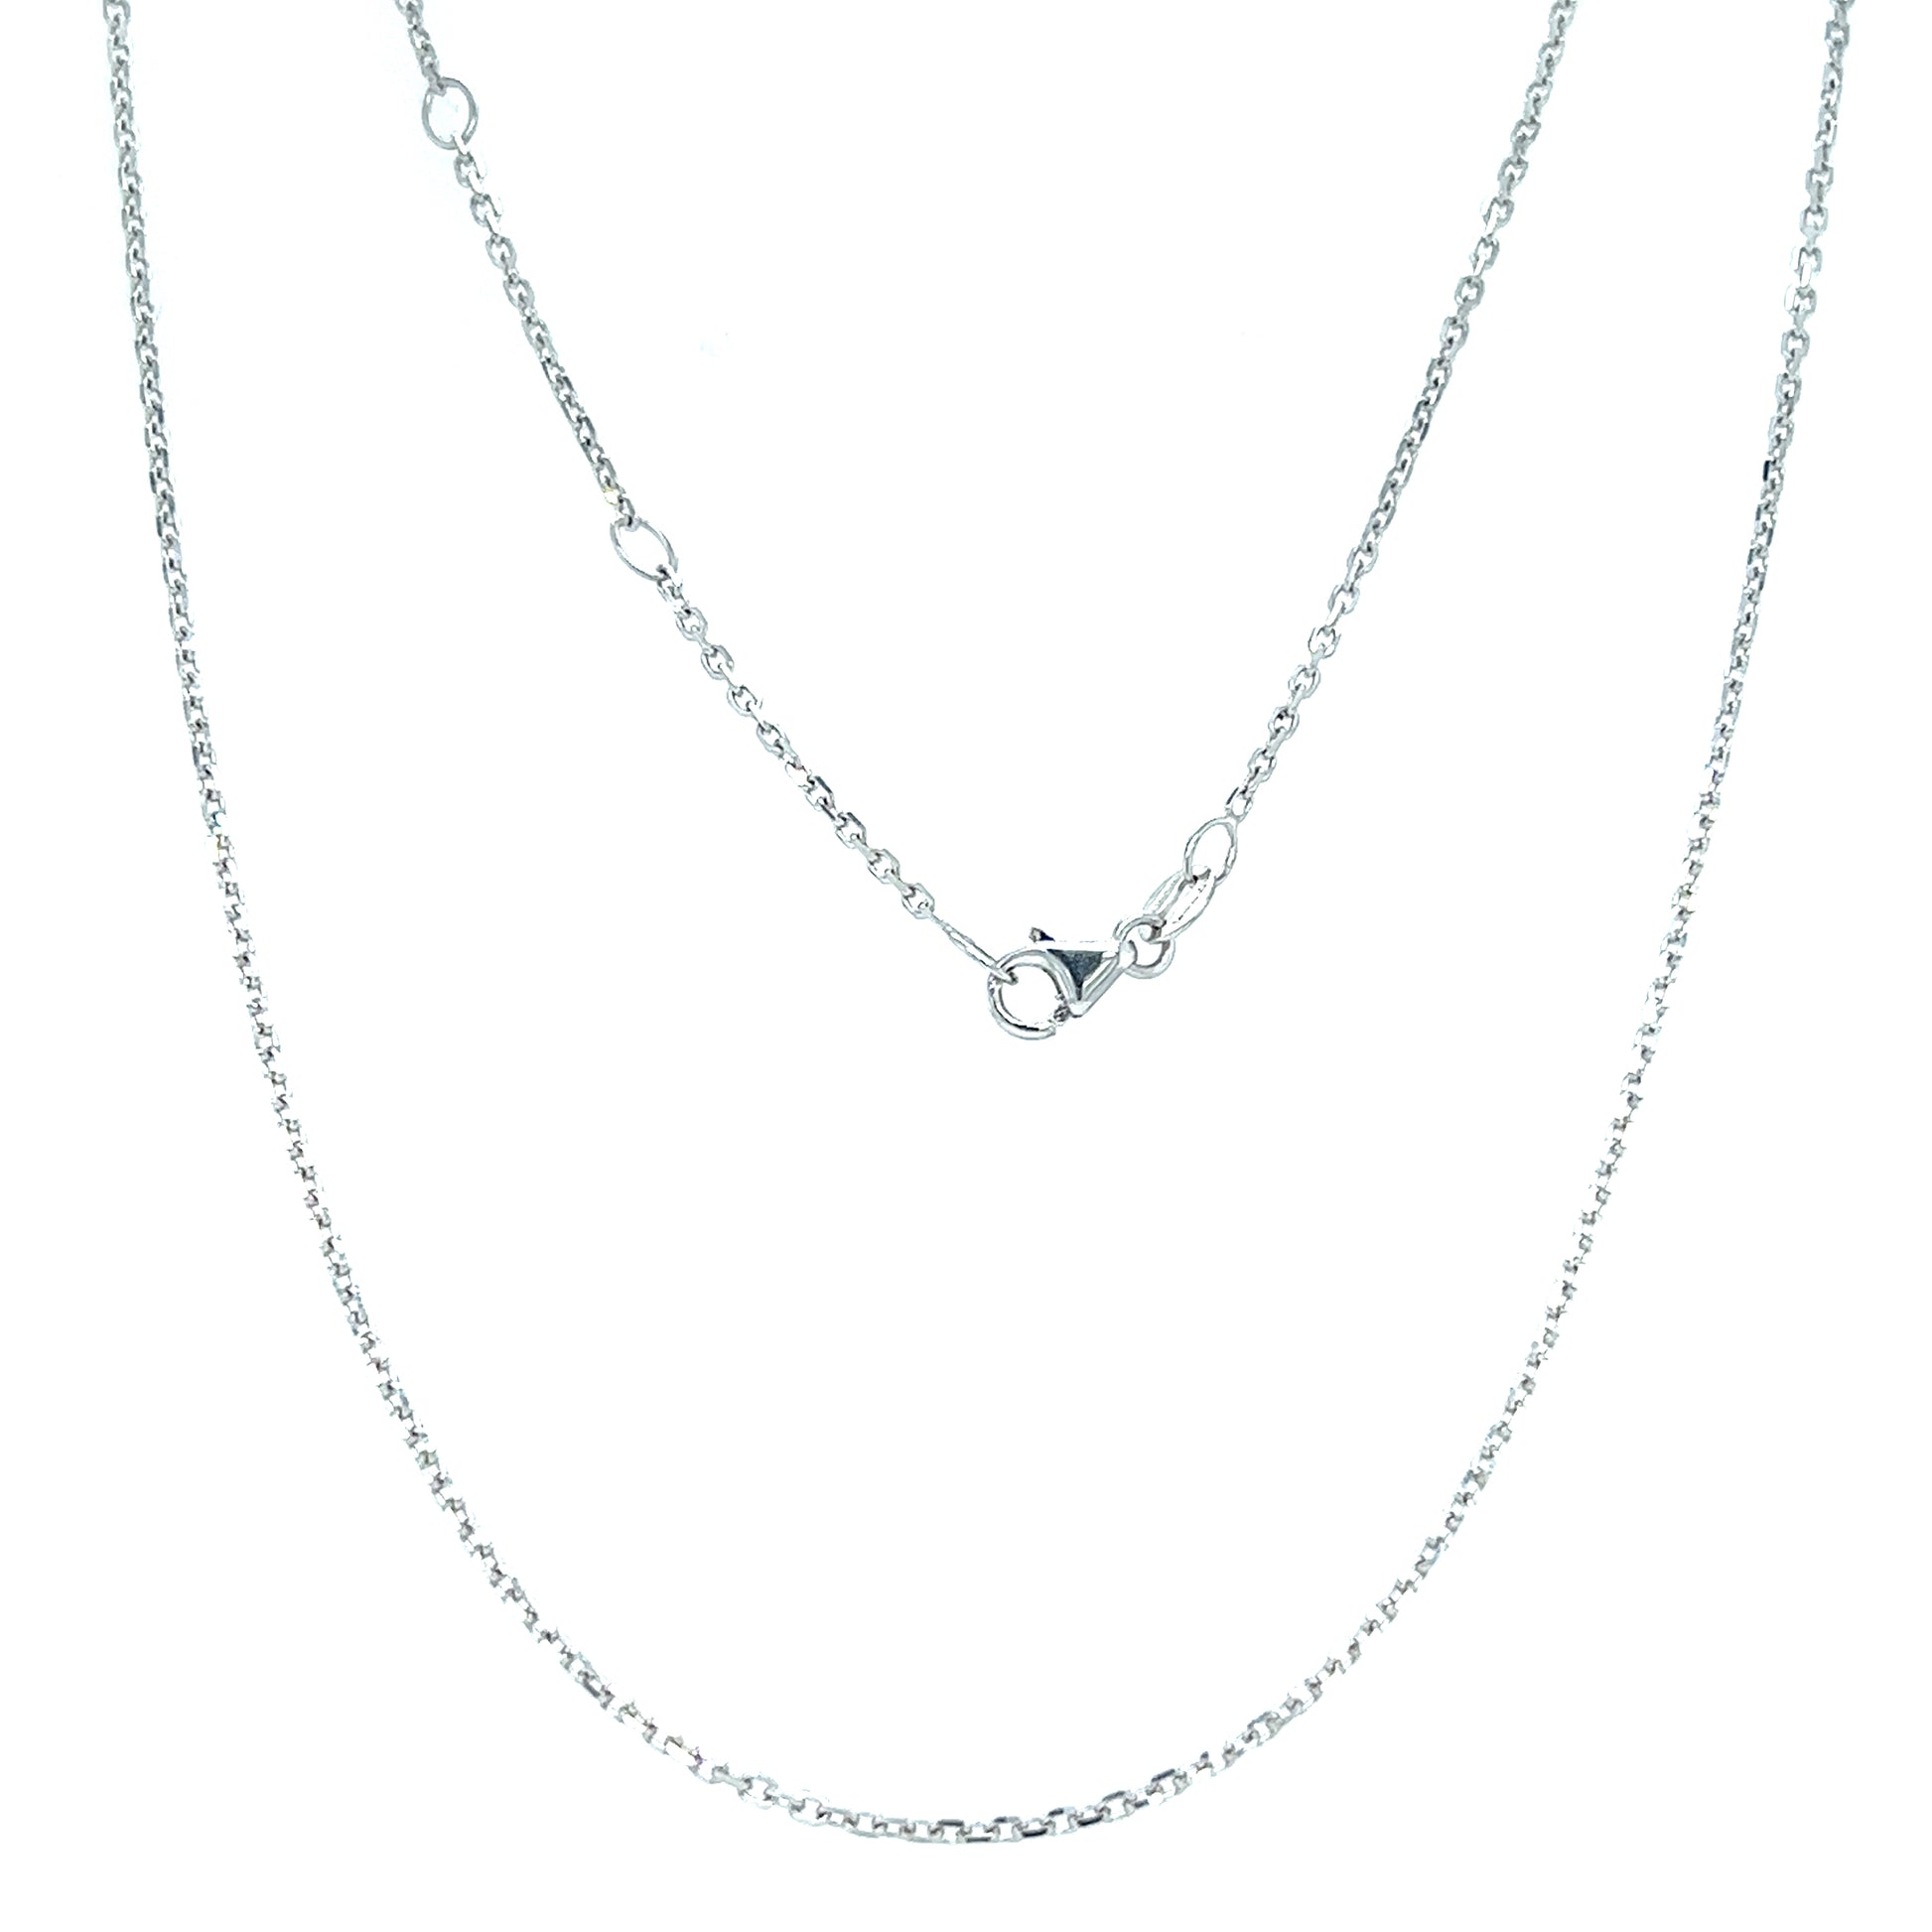 Cable Chain 1.3mm with Adjustable Length in 14K White Gold Full Chain View